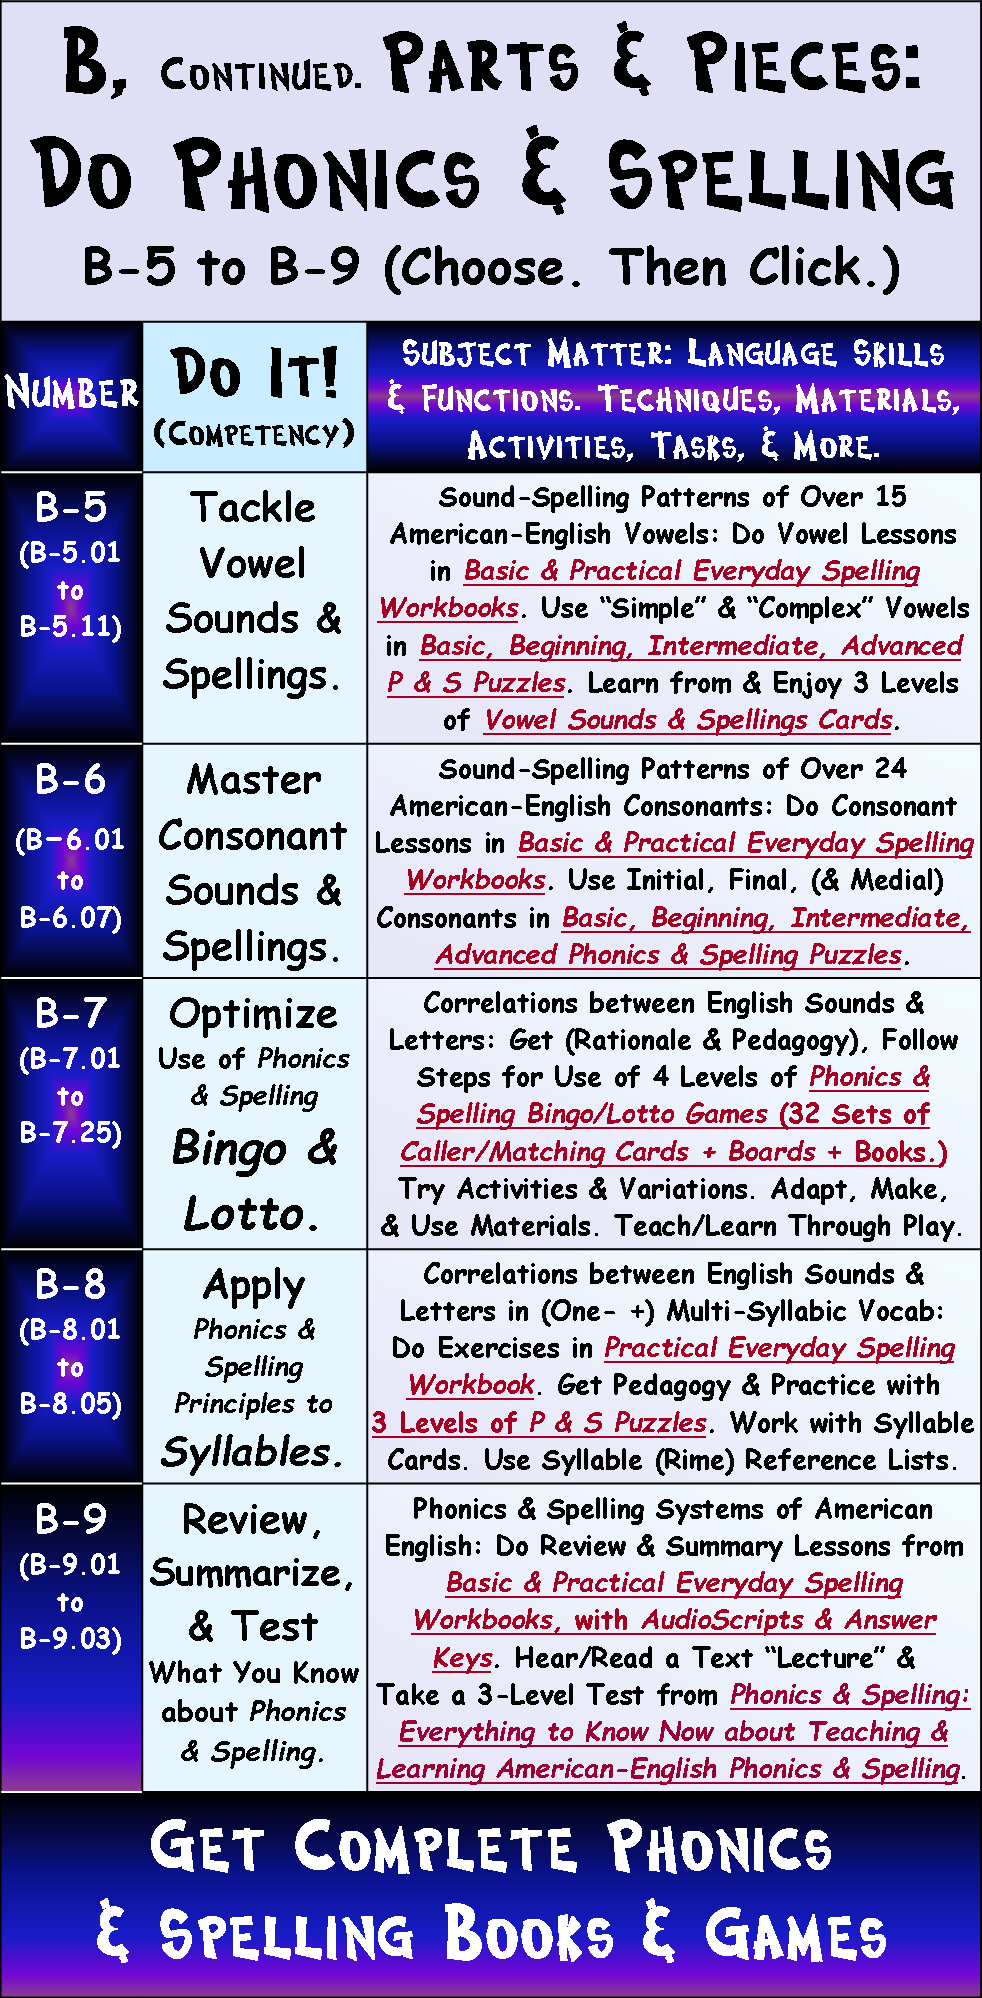 How to Put Together the Parts & Pieces That Make Language Work: Phonics & Spelling Competencies Part II